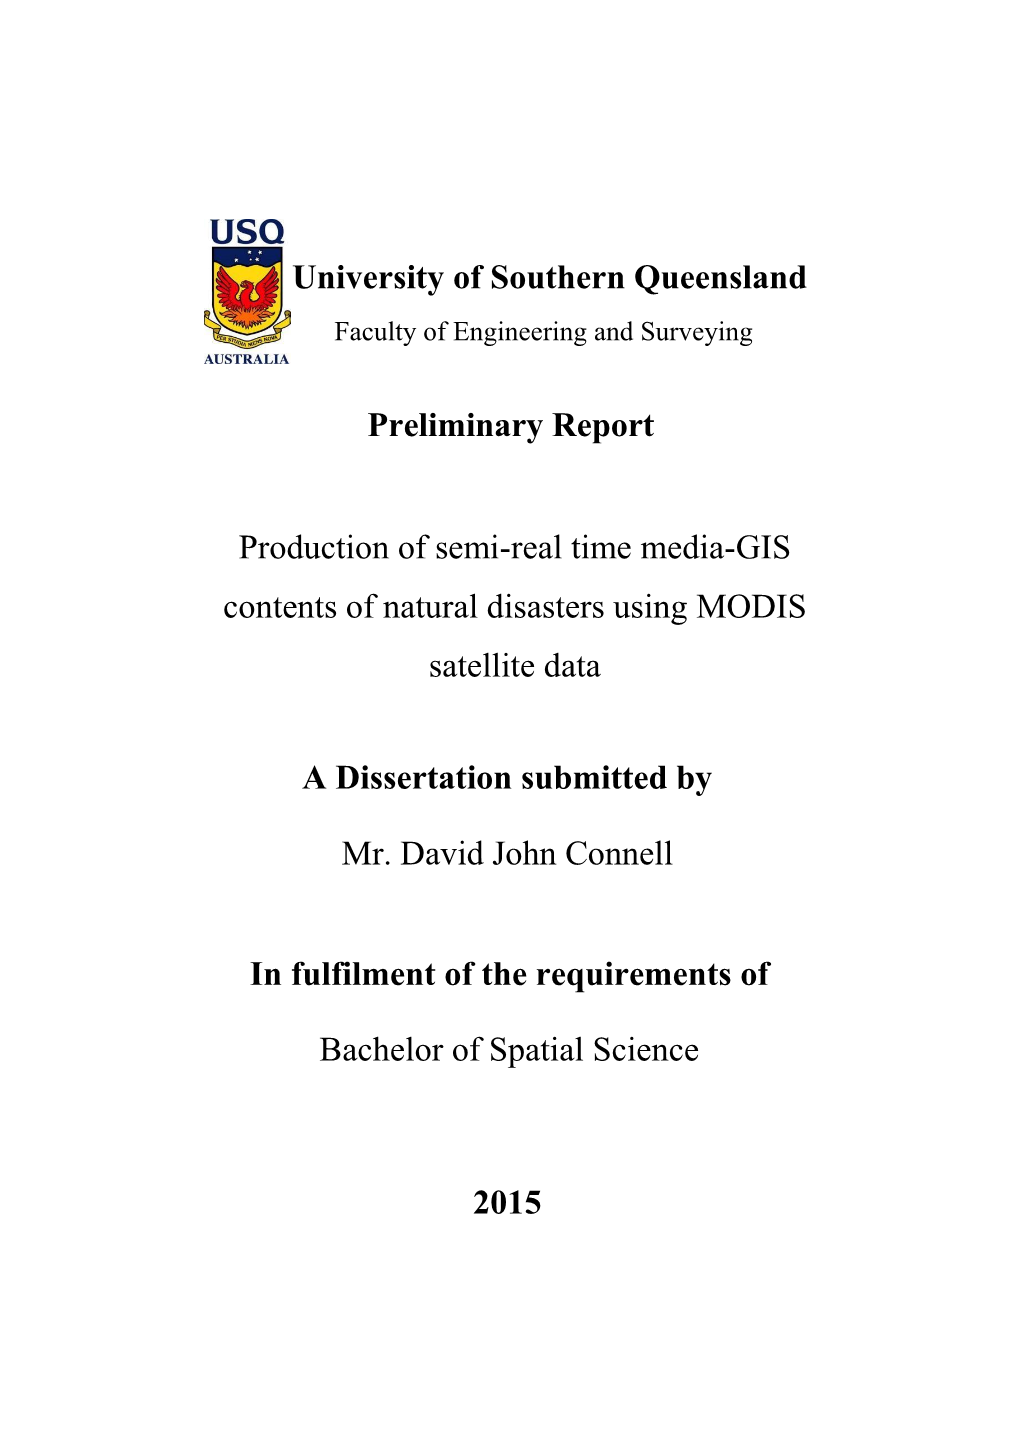 University of Southern Queensland Preliminary Report Production Of